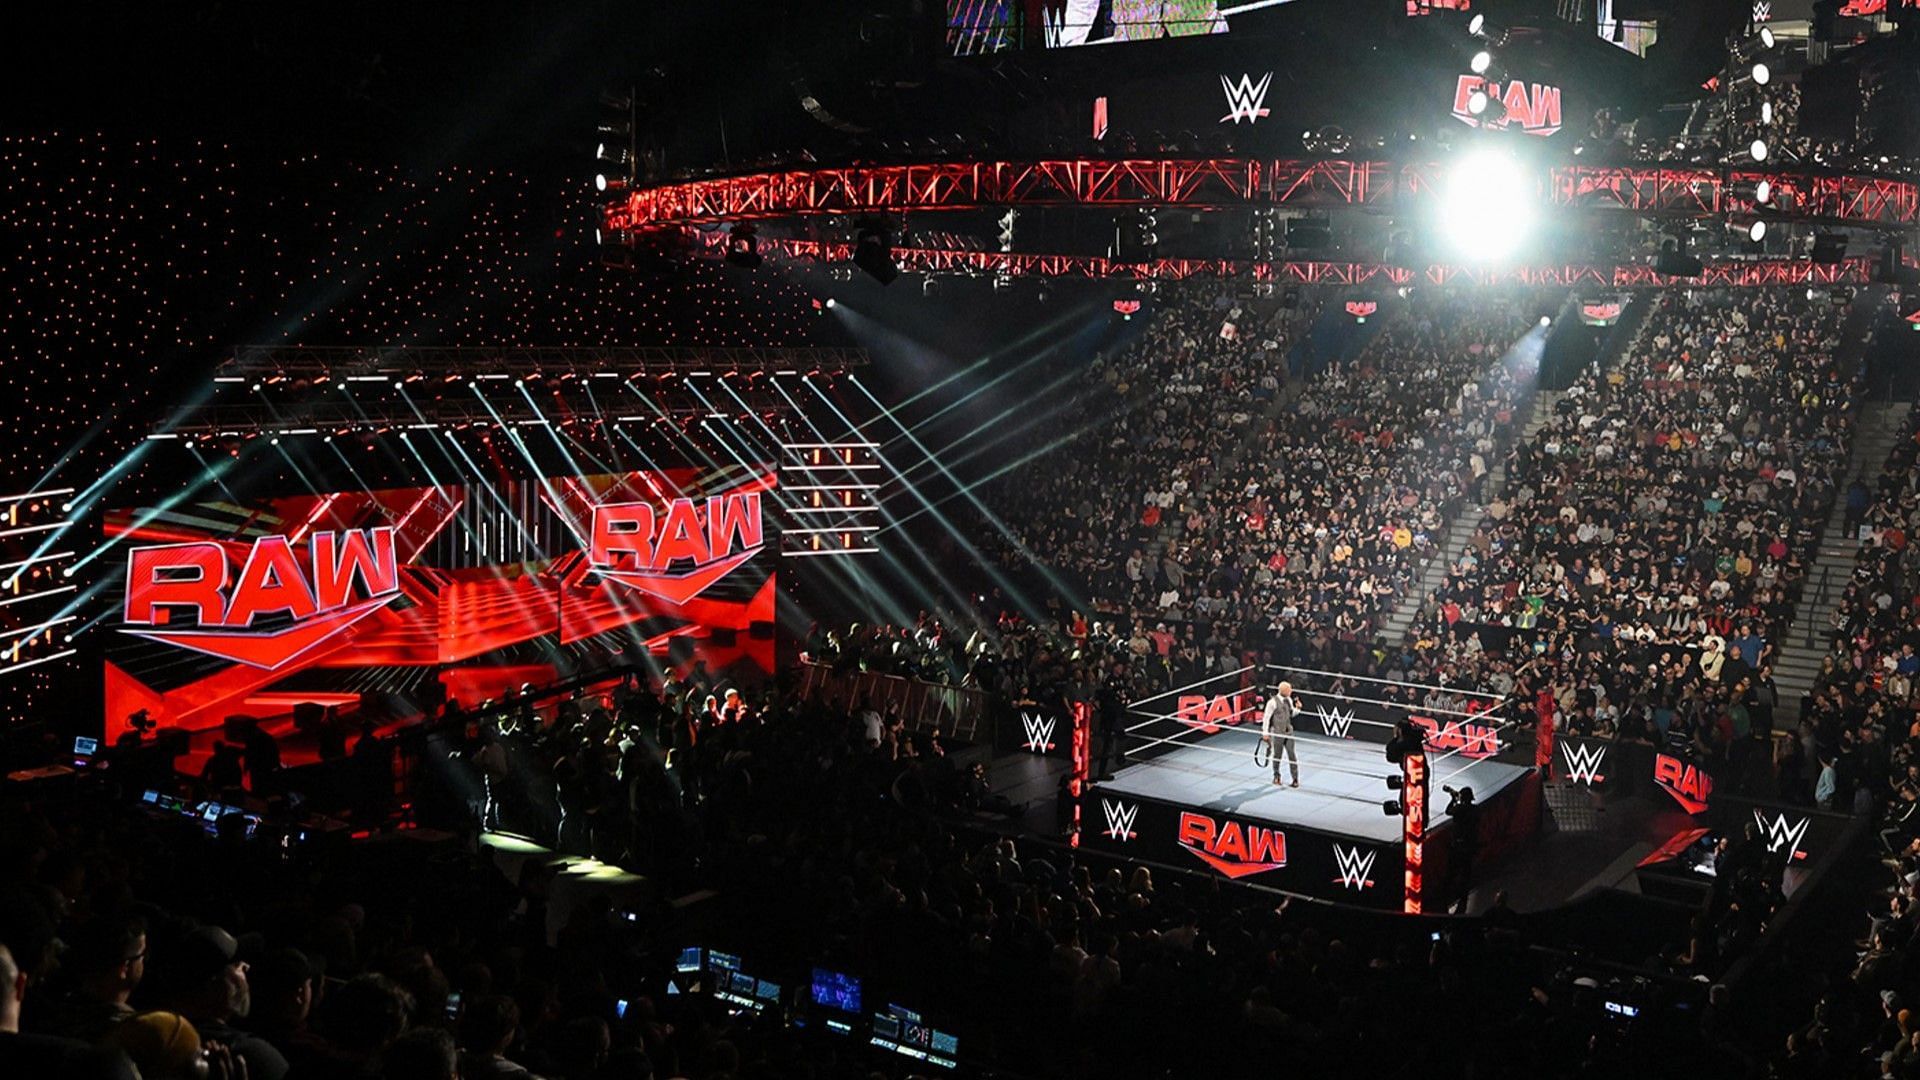 The WWE Universe packs their local arena for a live RAW episode